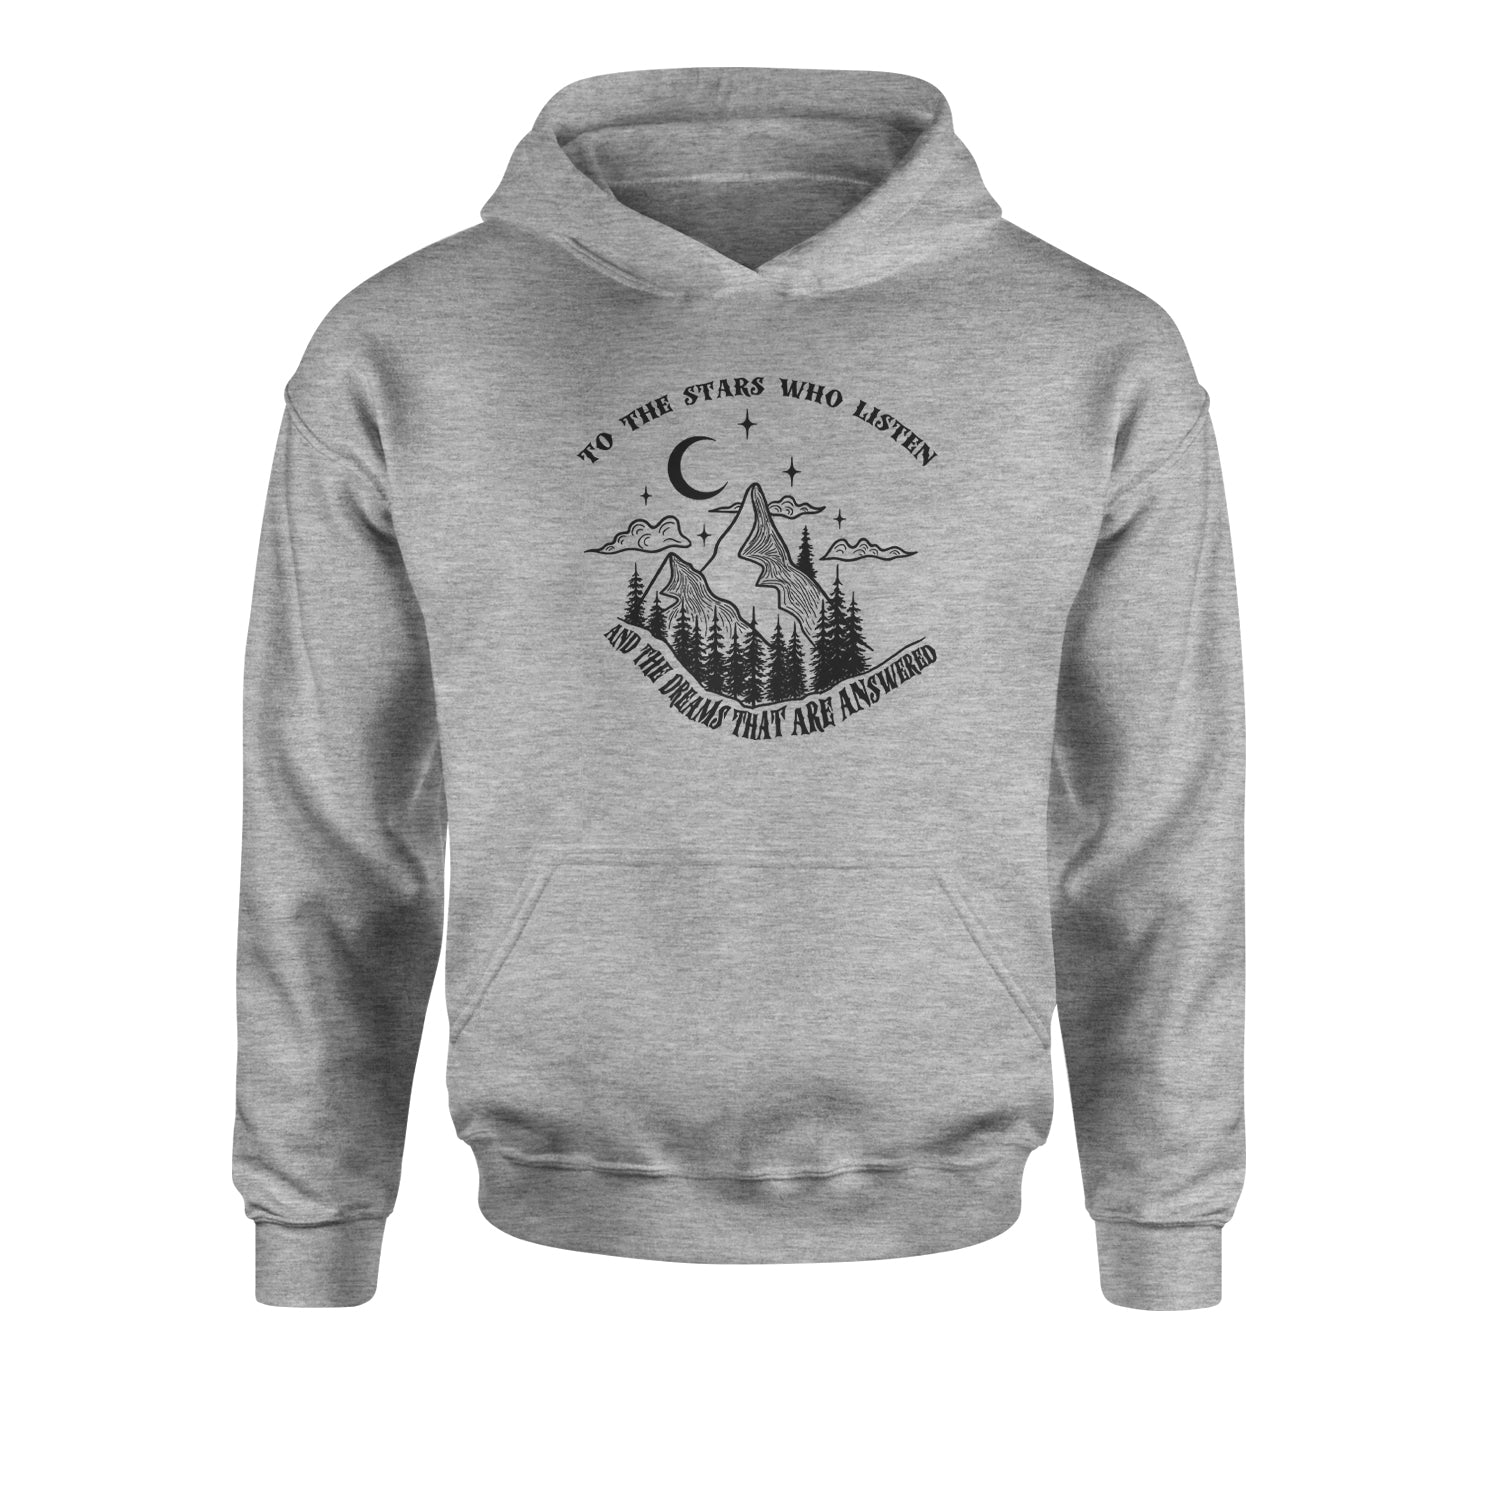 To The Stars Who Listen… ACOTAR Quote Youth-Sized Hoodie acotar, court, tamlin, thorns by Expression Tees